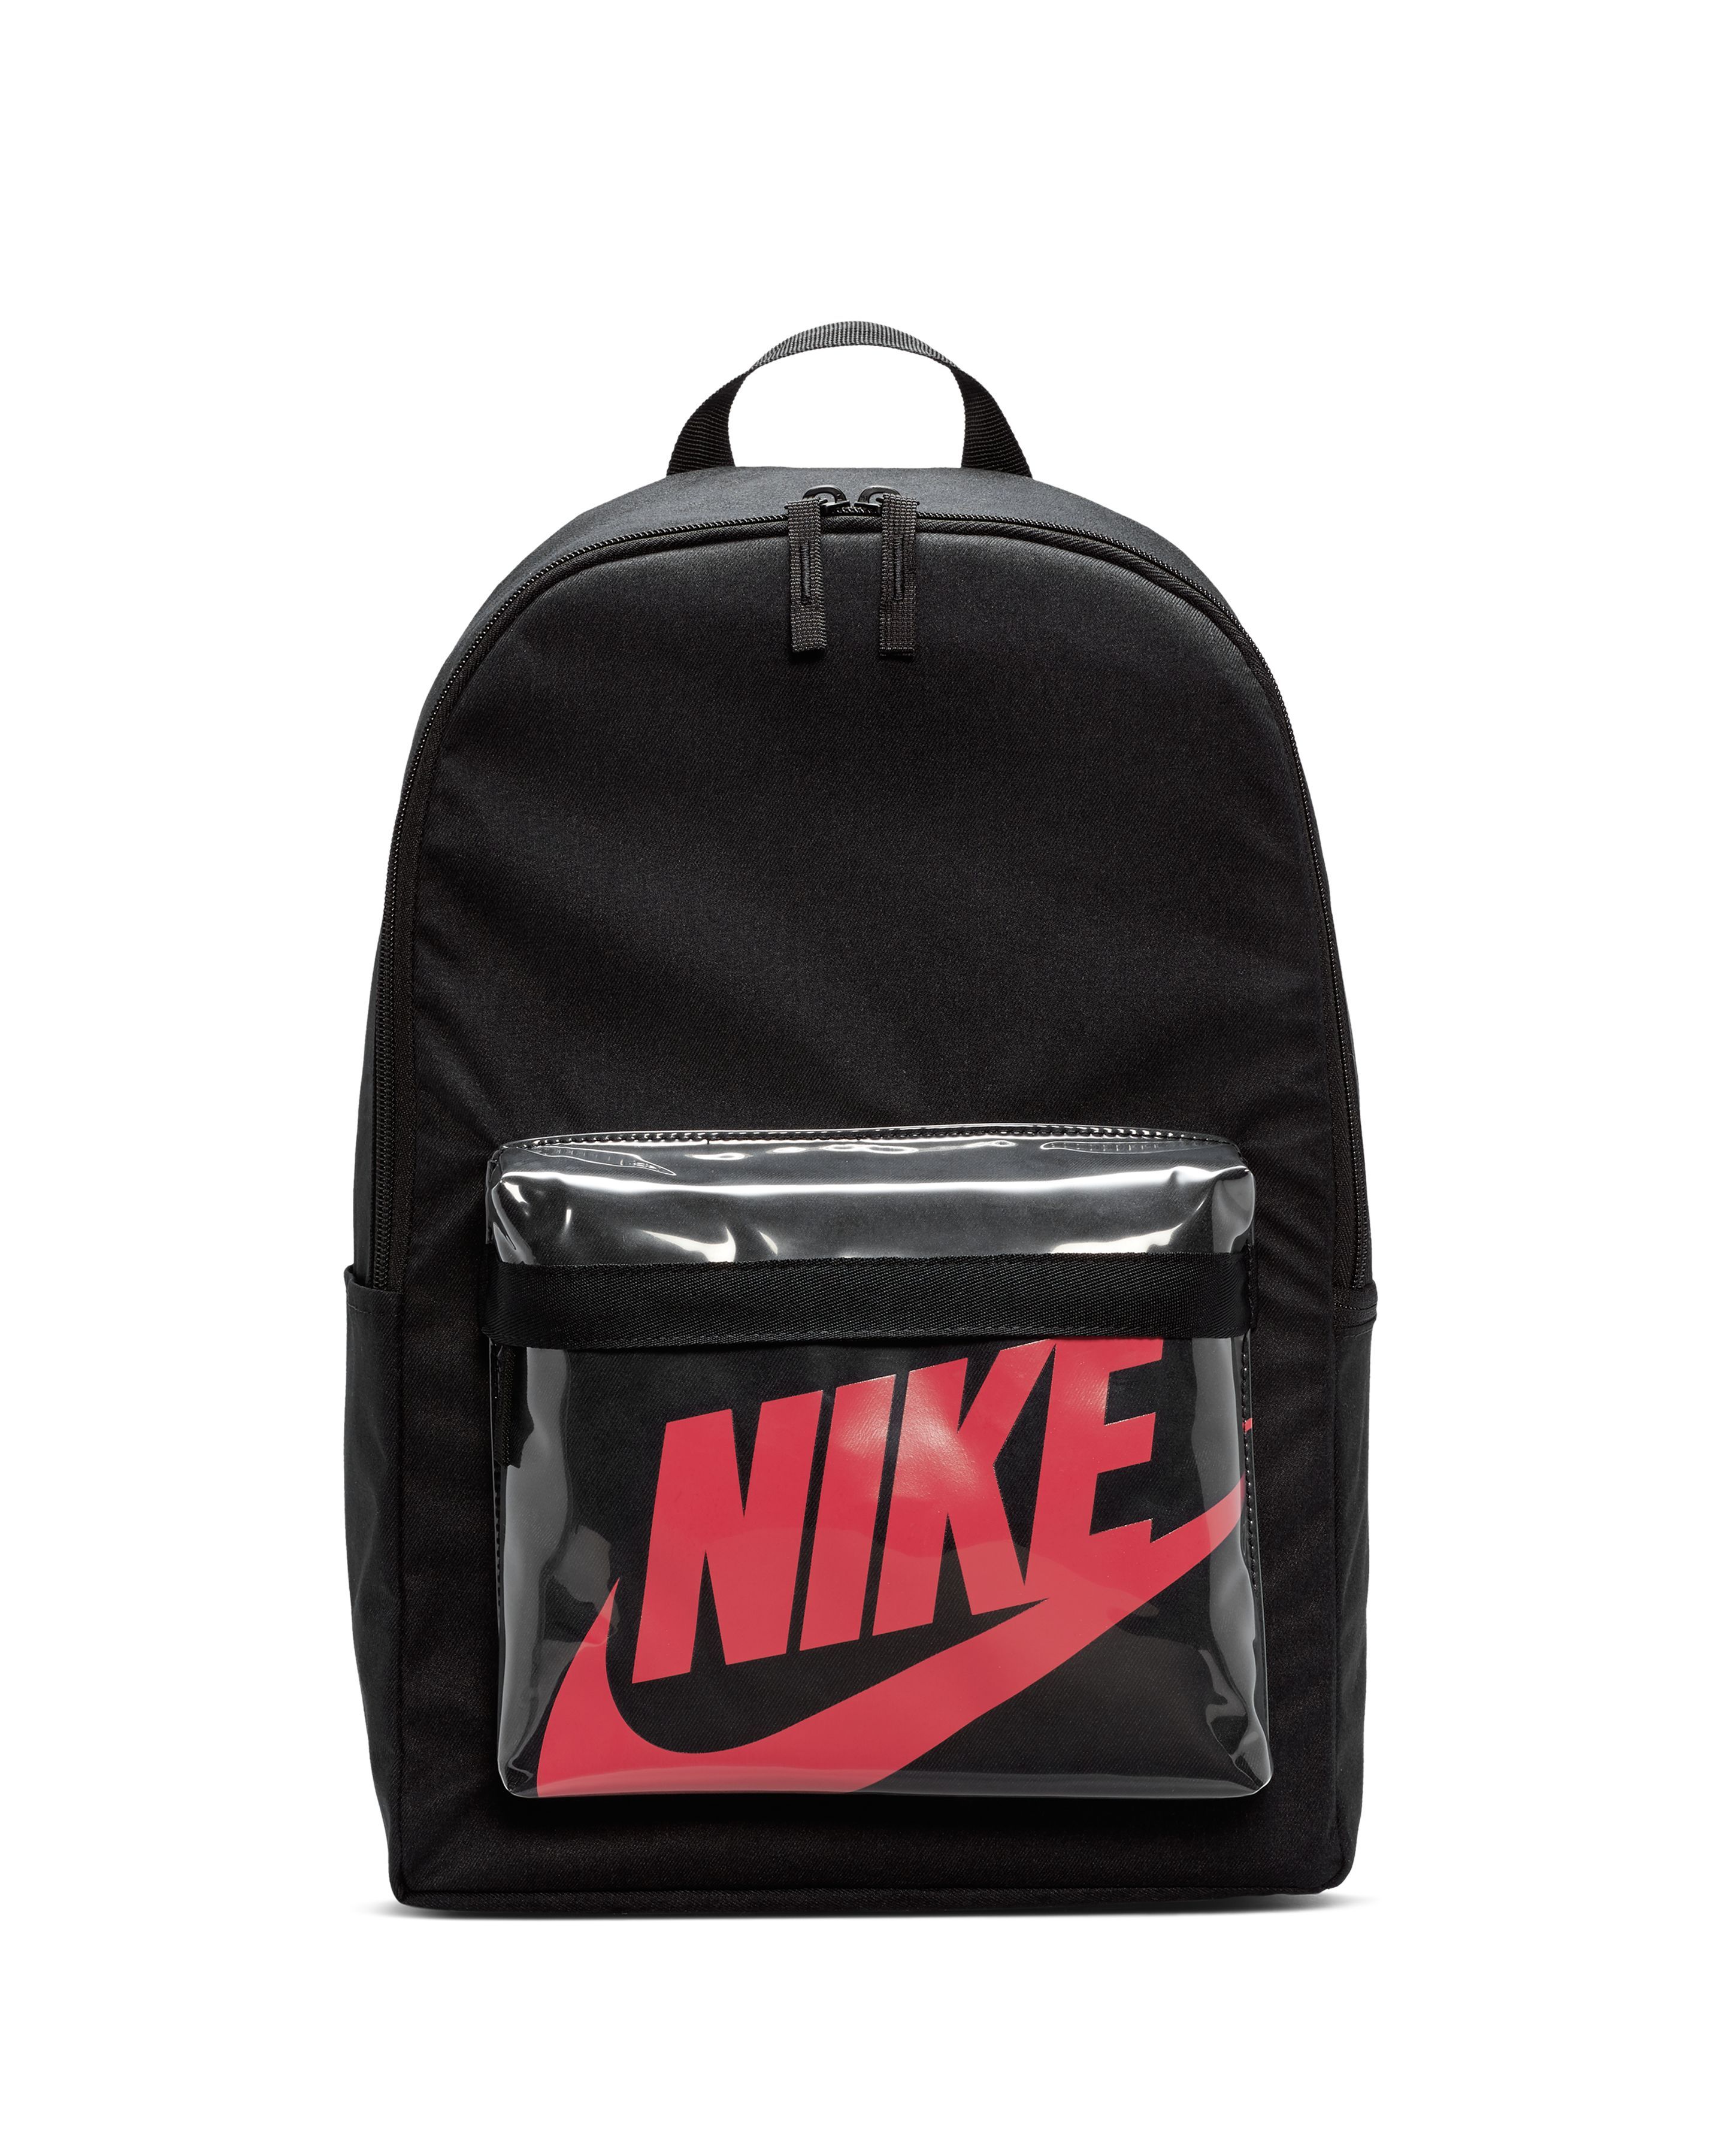 school bags for year 7